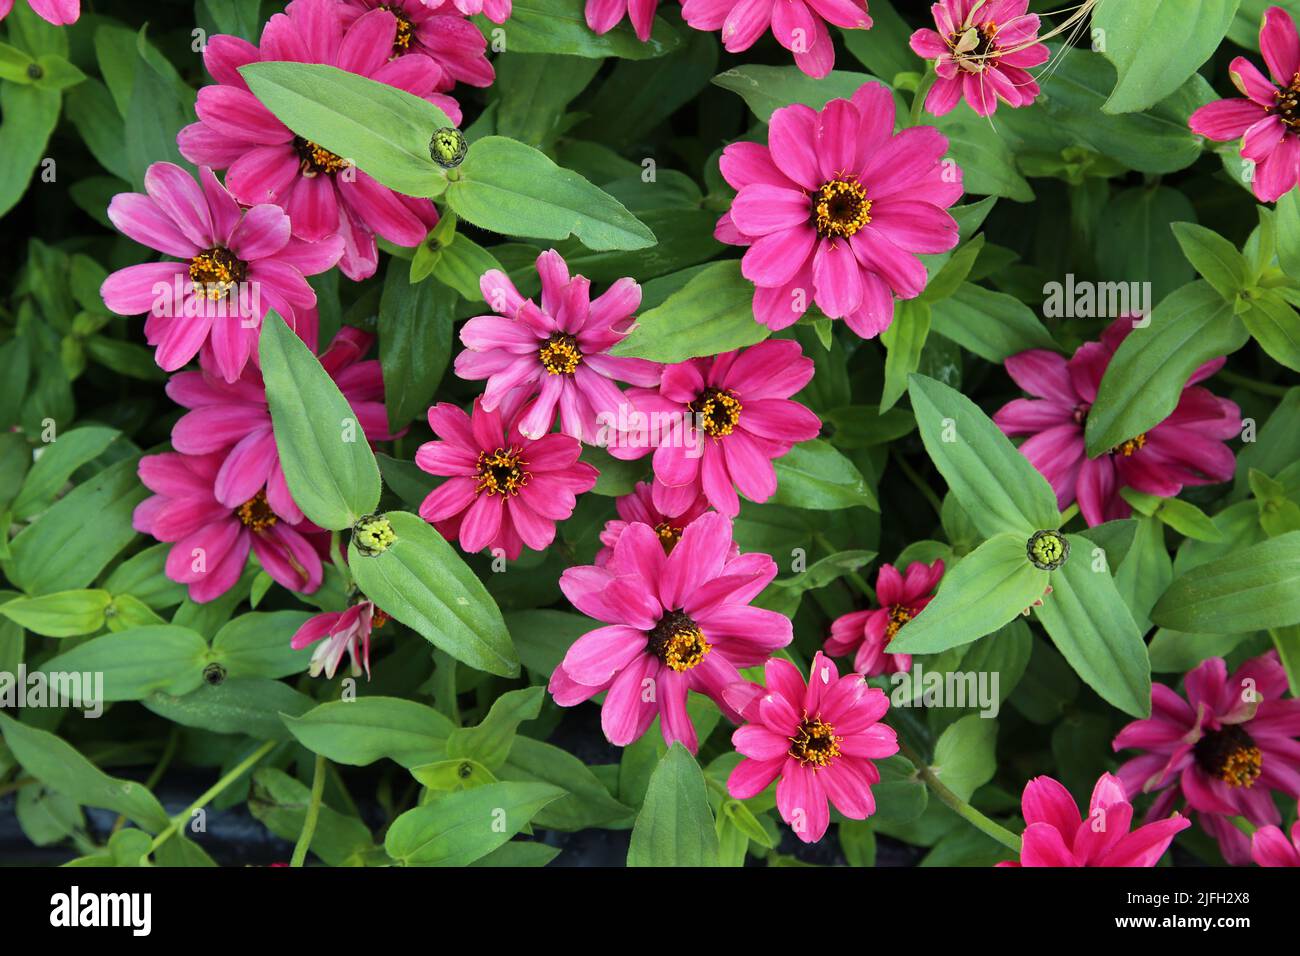 Plenty of beautiful pink zinnia flowers in a closeup. Bright blooming garden flowers photographed during spring season in Helsinki, Finland. Stock Photo